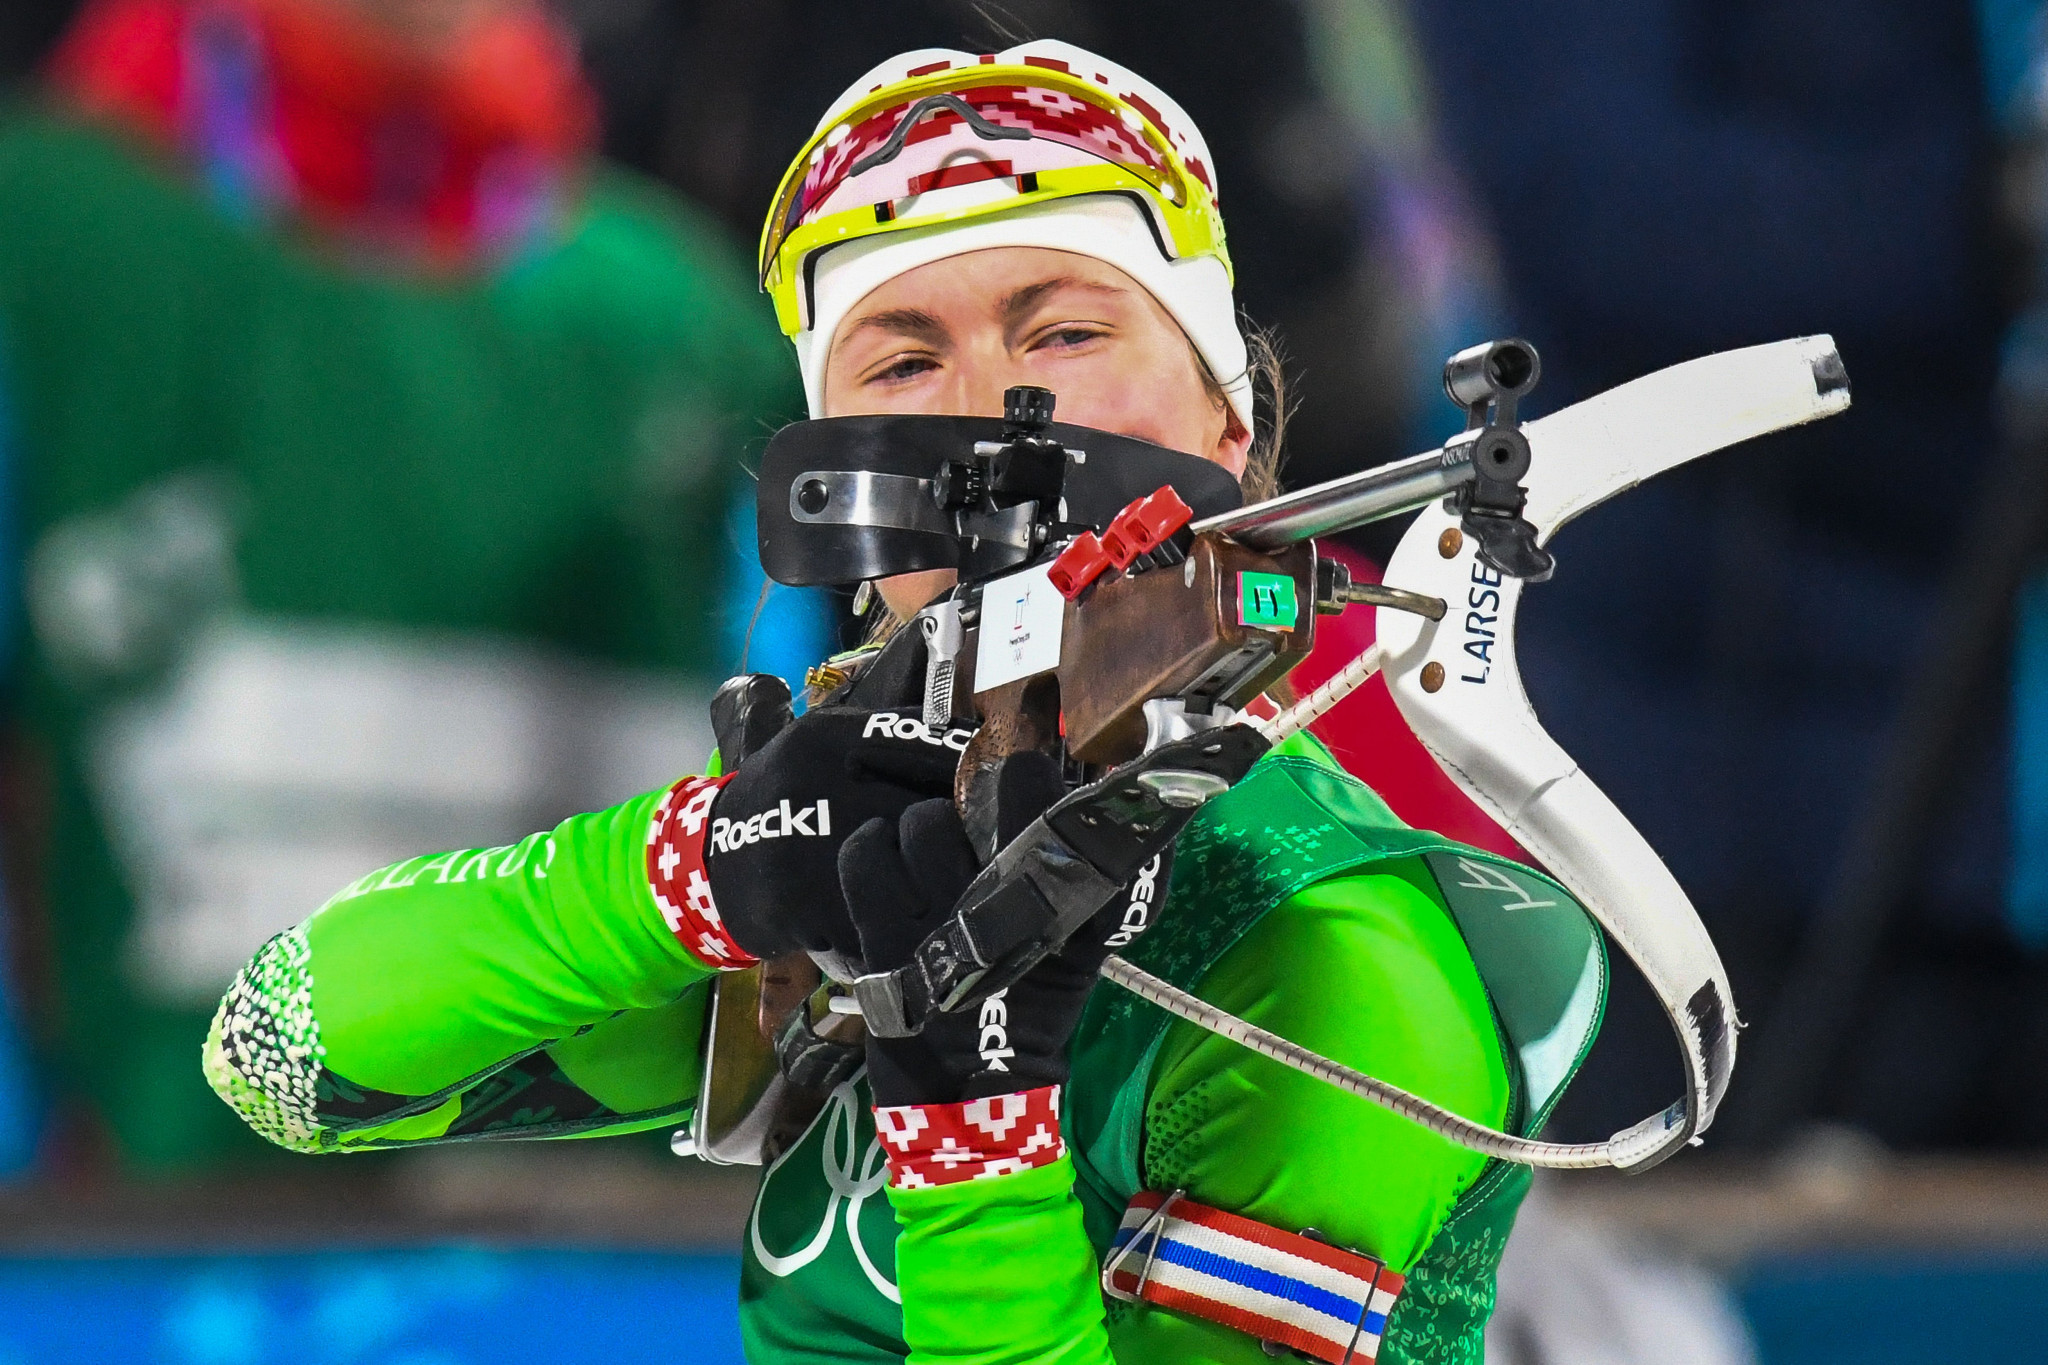 Belarus will be without their most successful Olympic athlete at Beijing 2022 following the retirement of four-time gold biathlon medallist Darya Domracheva, who is now coaching the Chinese team ©Getty Images